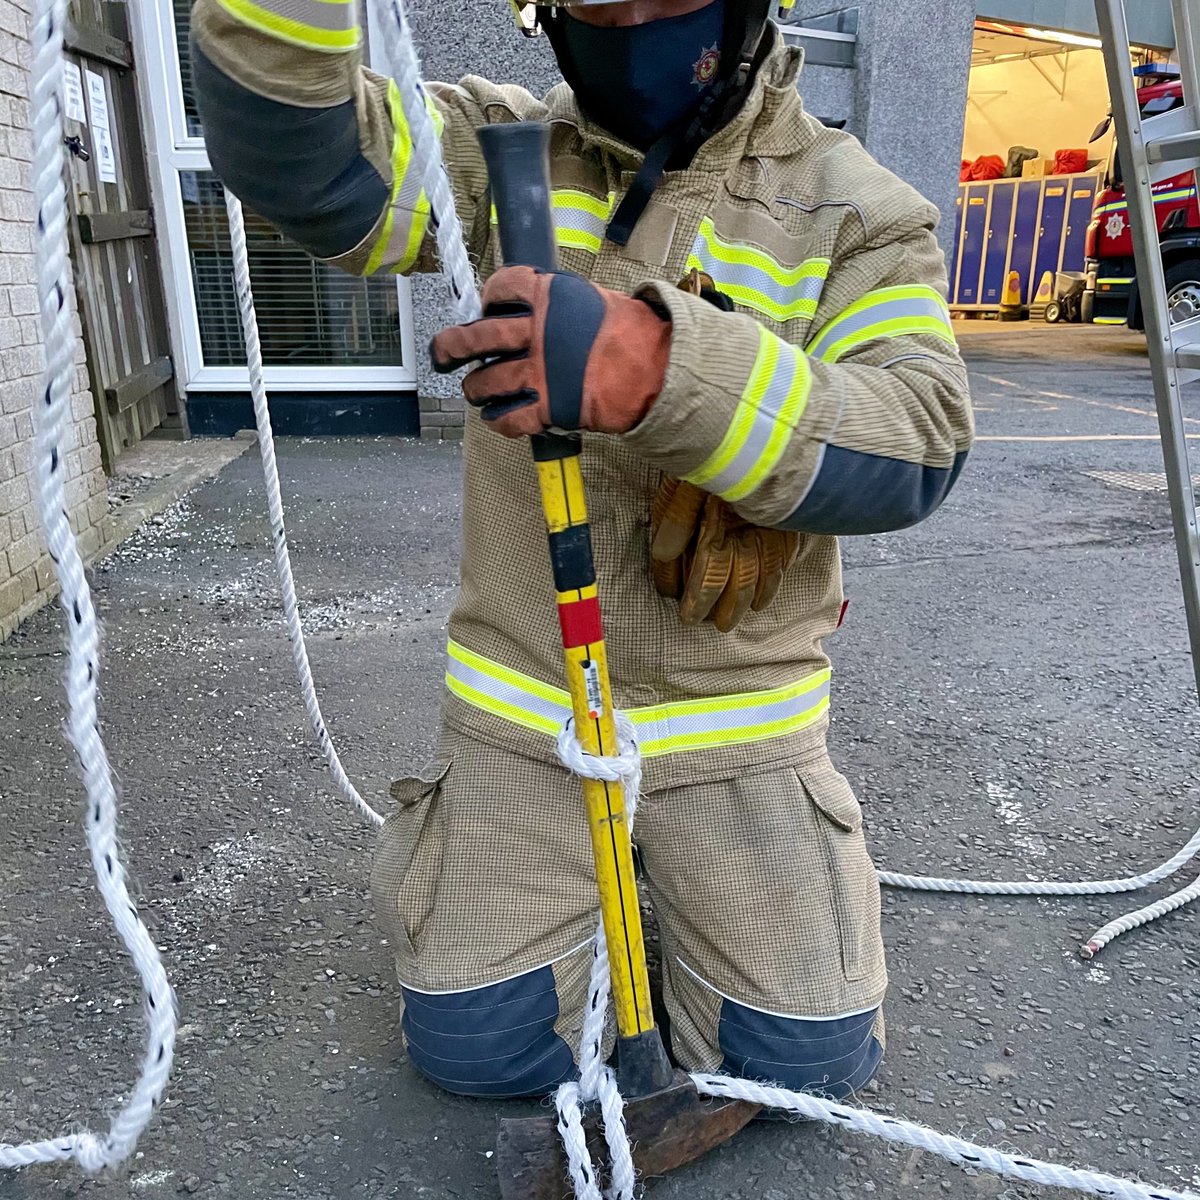 Back to basics for our developing FF’s with #CoreSkills particularly knots & lines & their practical applications; hauling delivery hose to 2nd floor & utilising hose becket, securing various tools for hauling aloft too. 
Hopefully have more trainee FF’s joining the team soon!